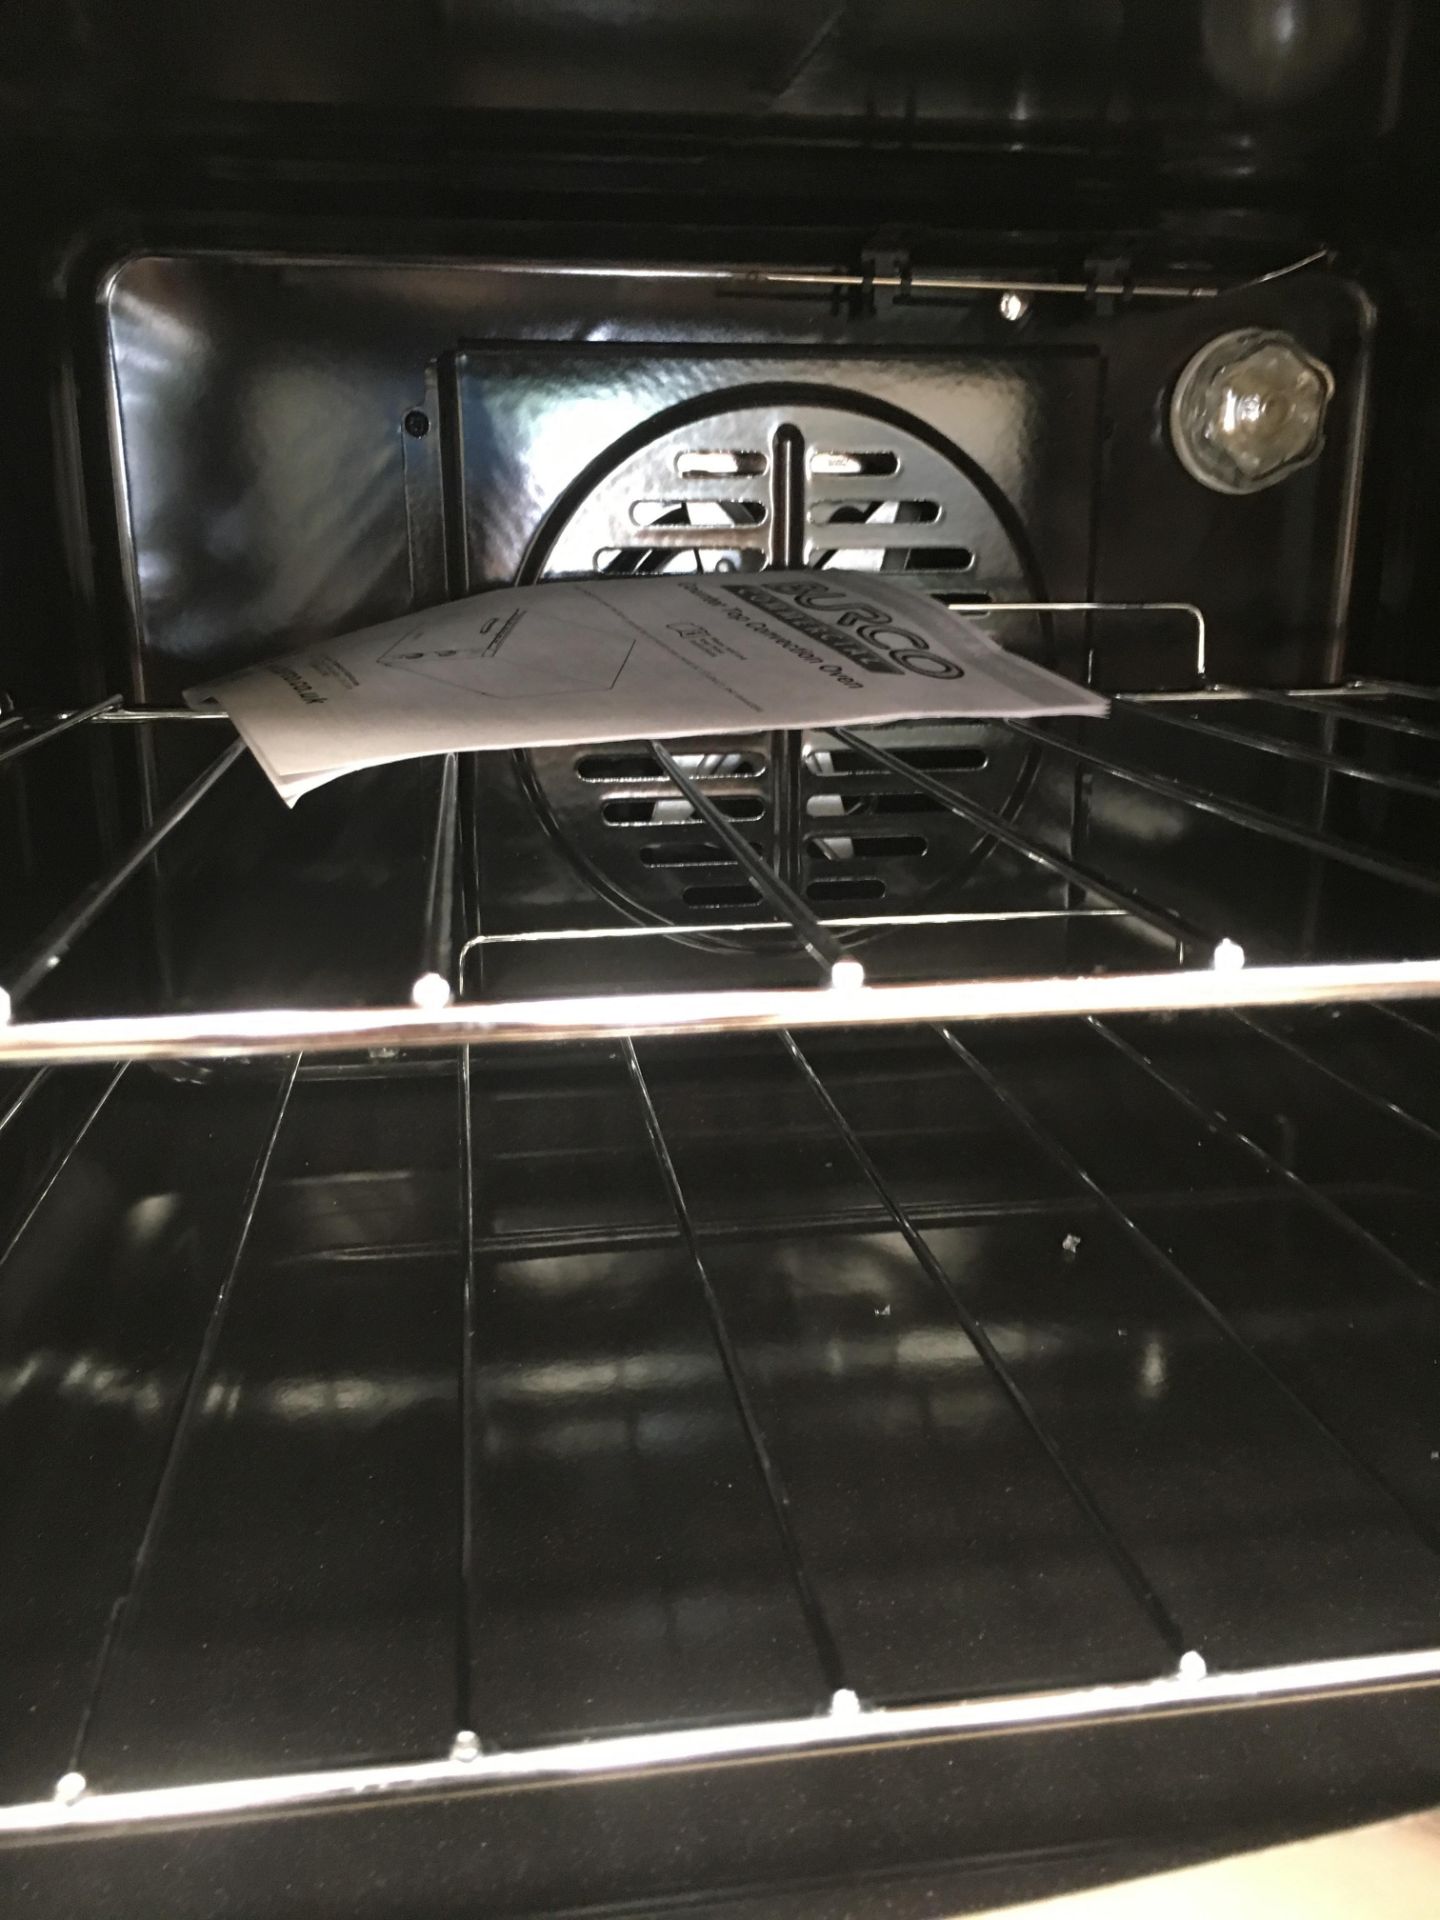 Burco Convection Oven - Image 2 of 2